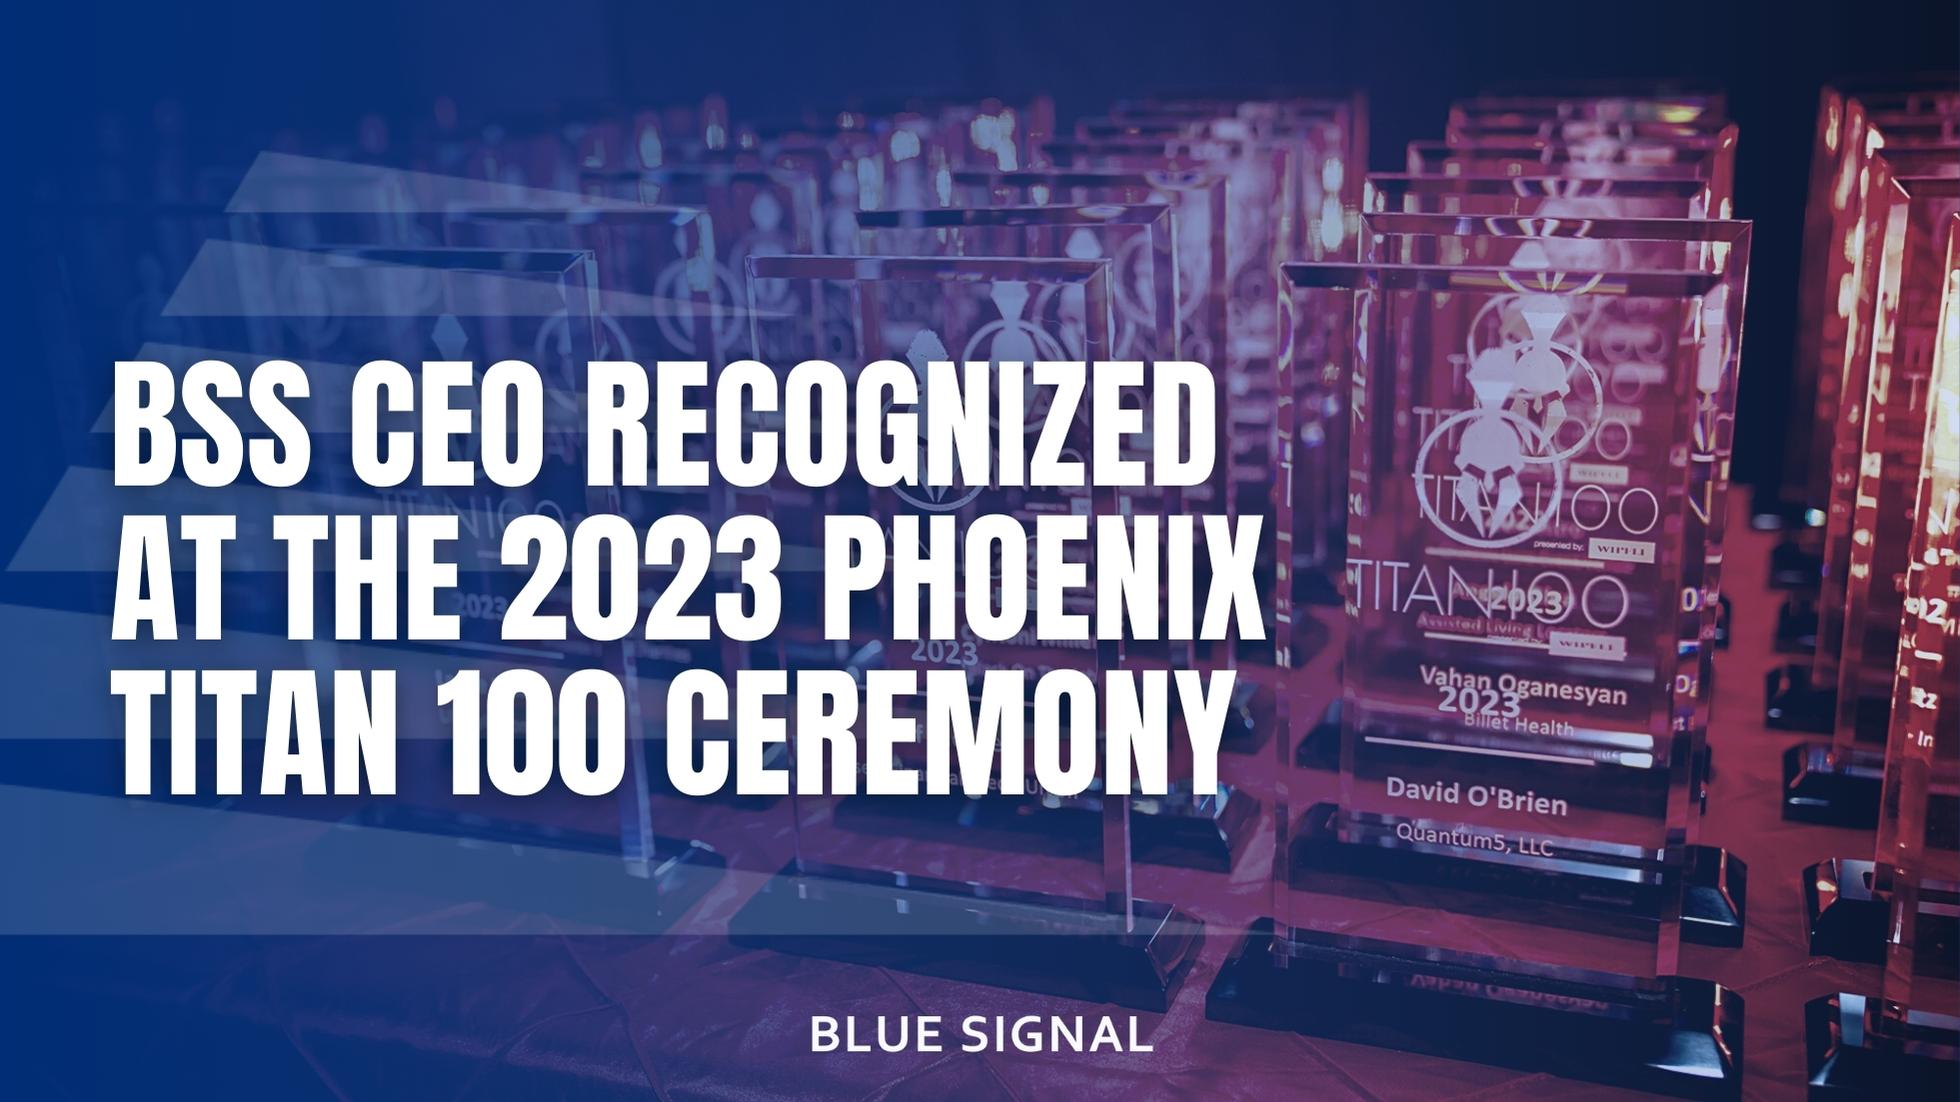 Blog banner graphic displaying the title "BSS CEO Recognized at the 2023 Phoenix Titan 100 Ceremony" with a blue gradient and company logo behind it, in front of a professional image of the Titan 100 trophy table.